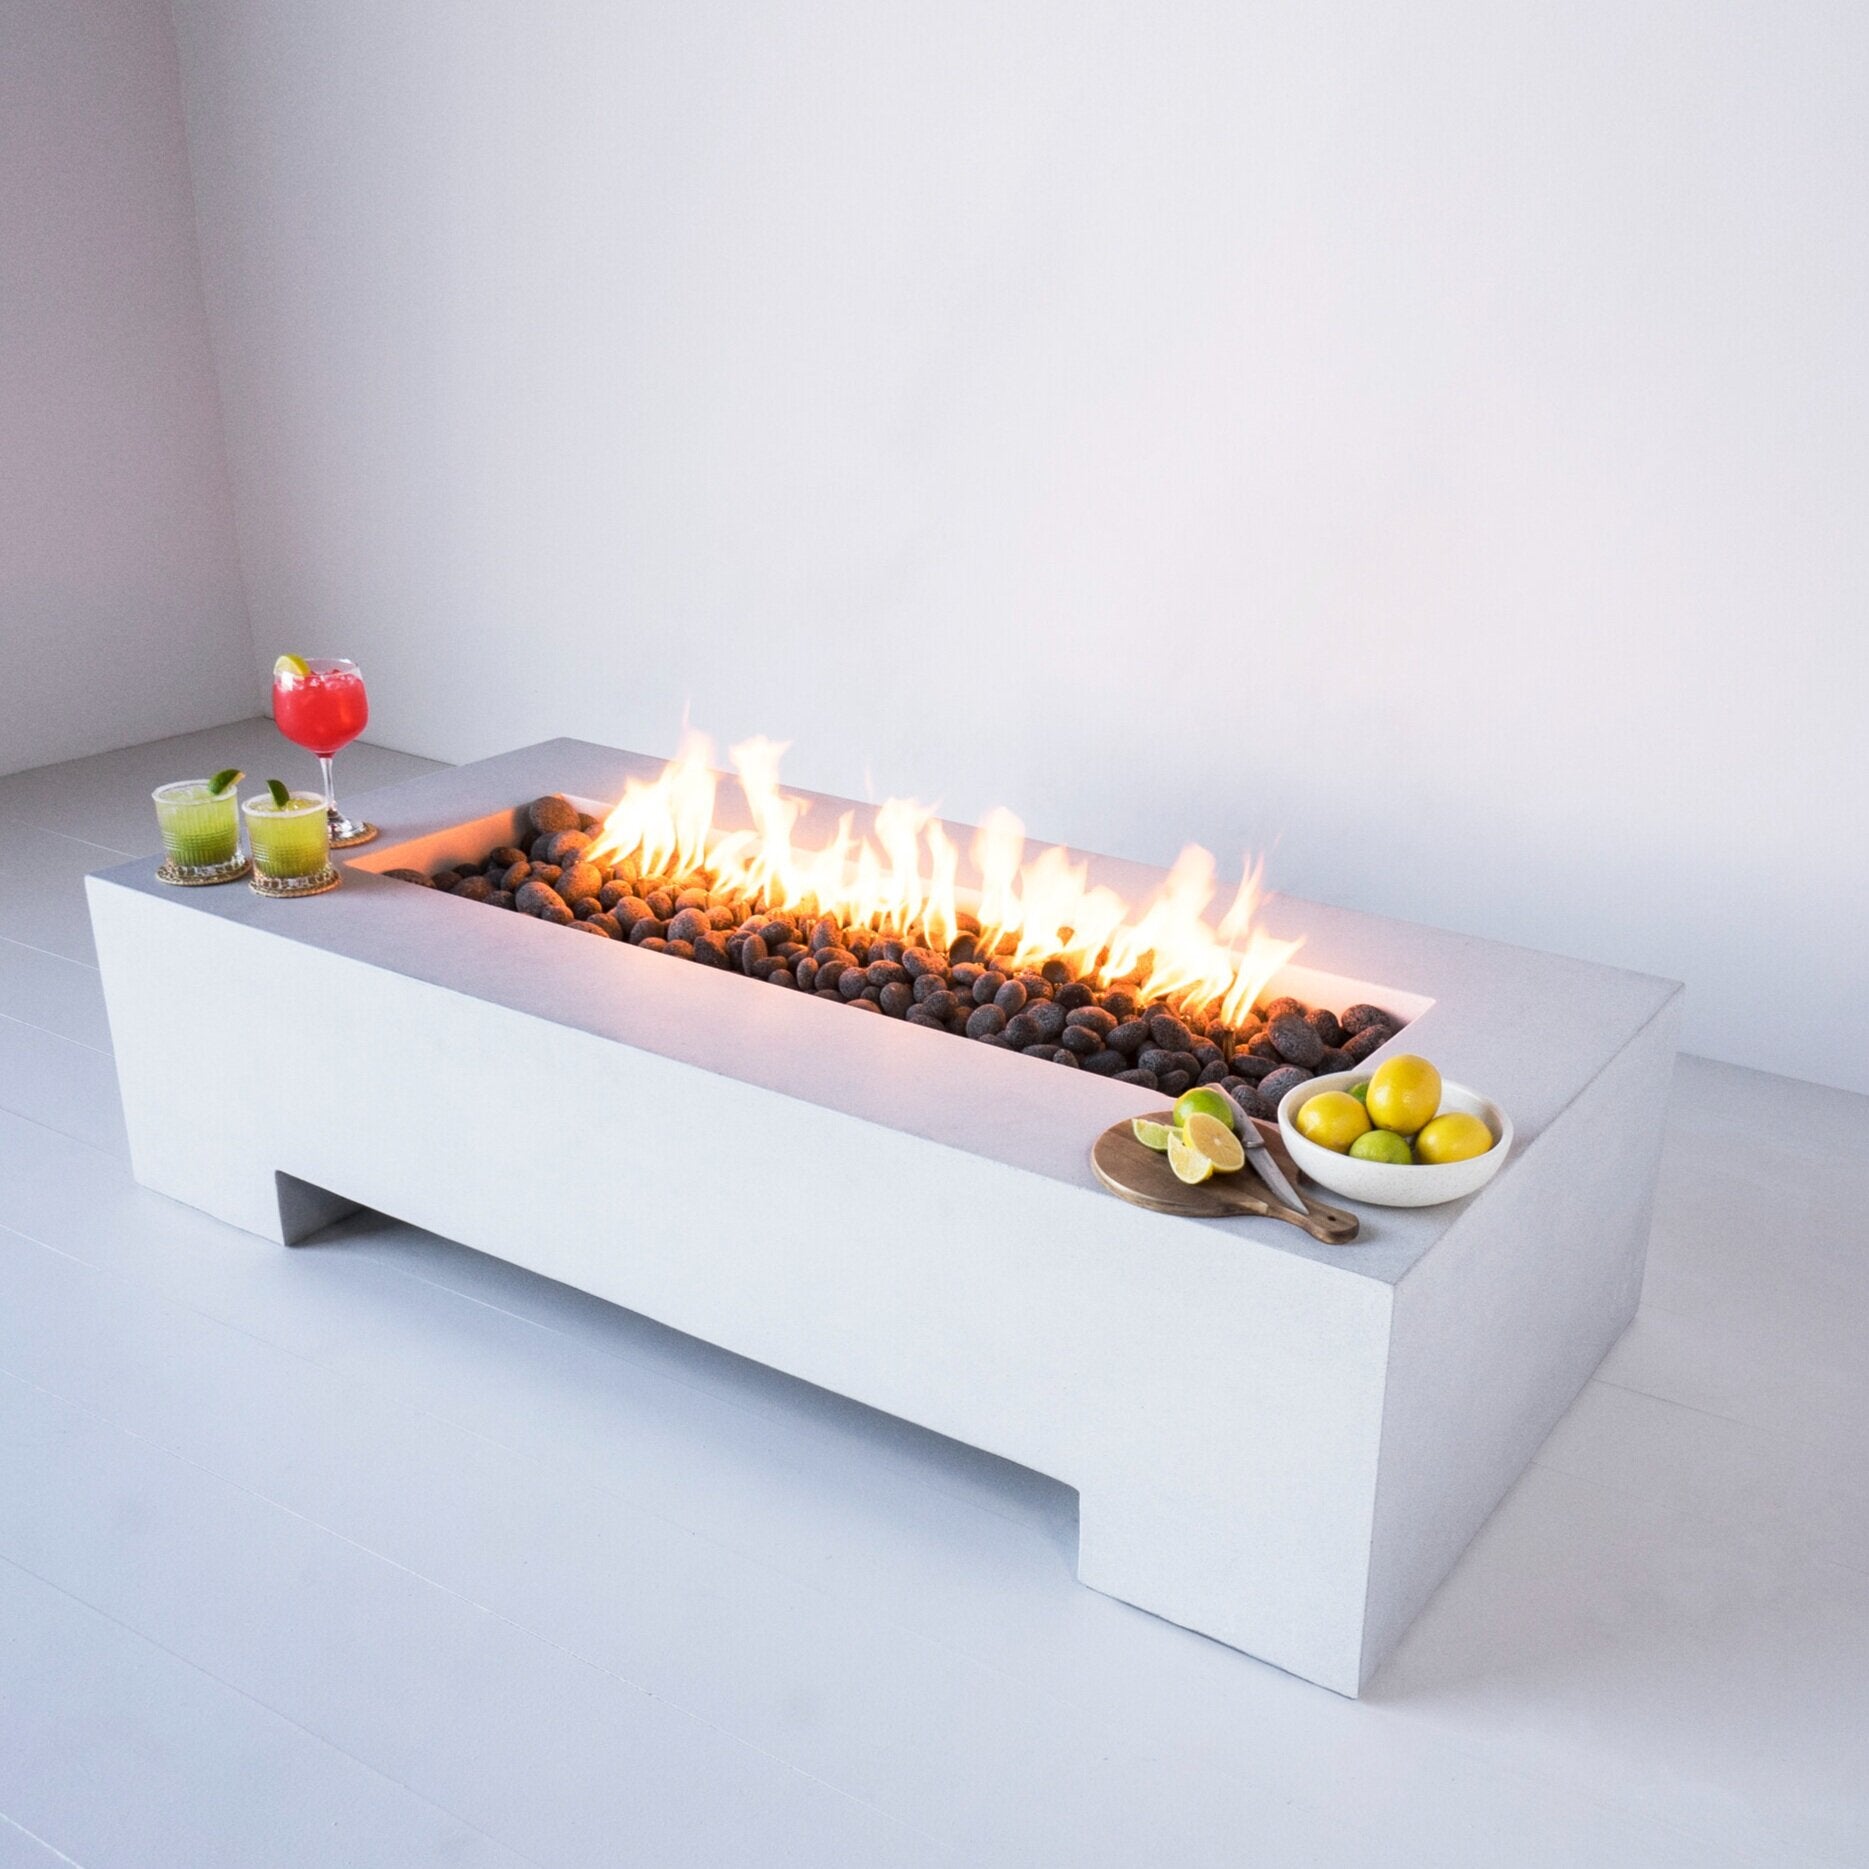 The Den - Custom Fire Pit for Narrow Spaces